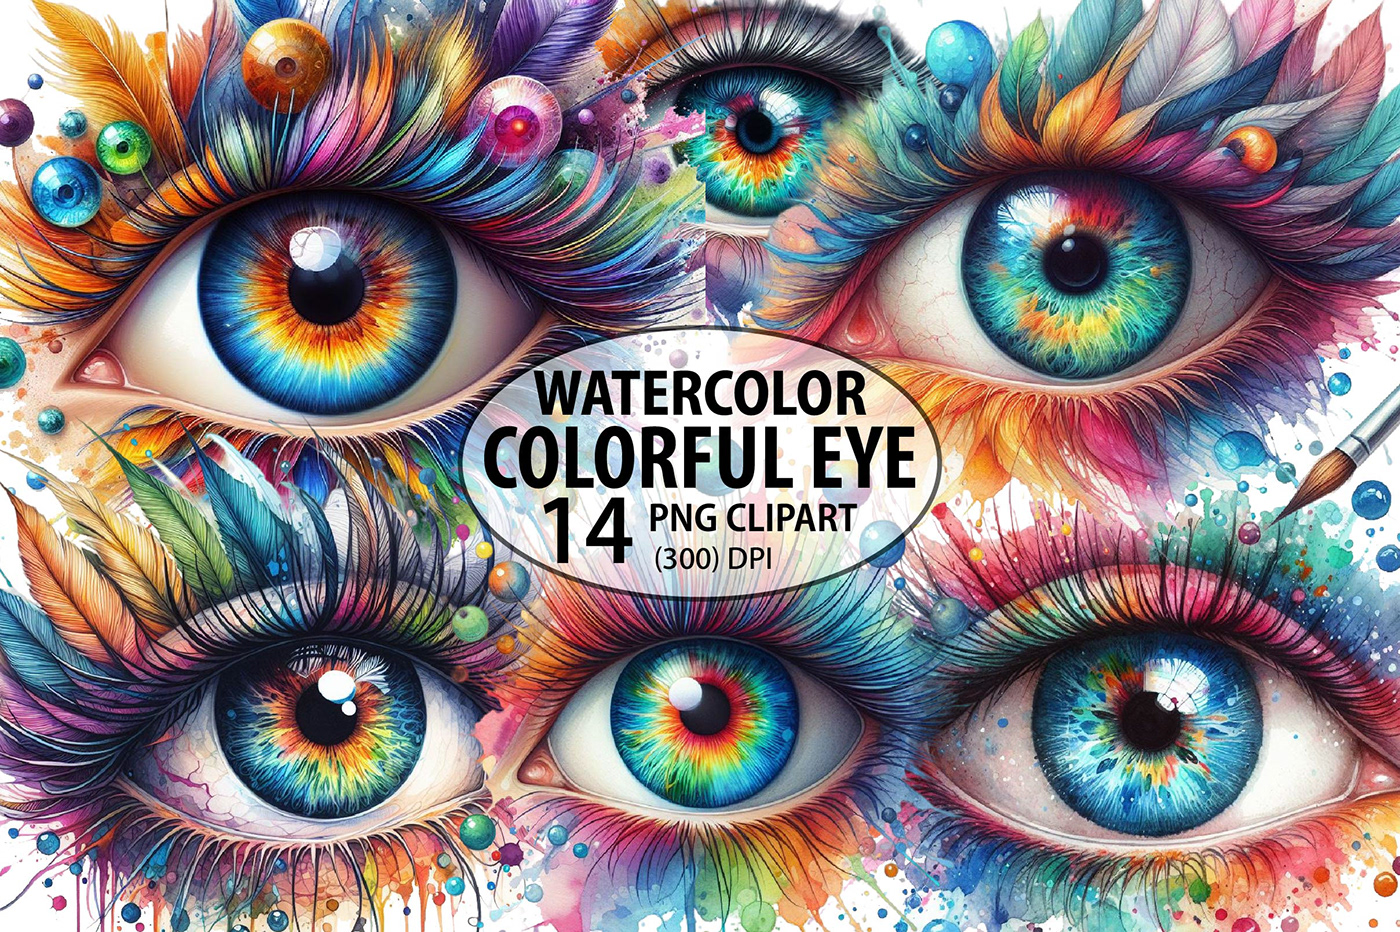 watercolor colorful watercolor painting eyes colorful art Watercolor clipart watercolor art eye art eye watercolor wall art